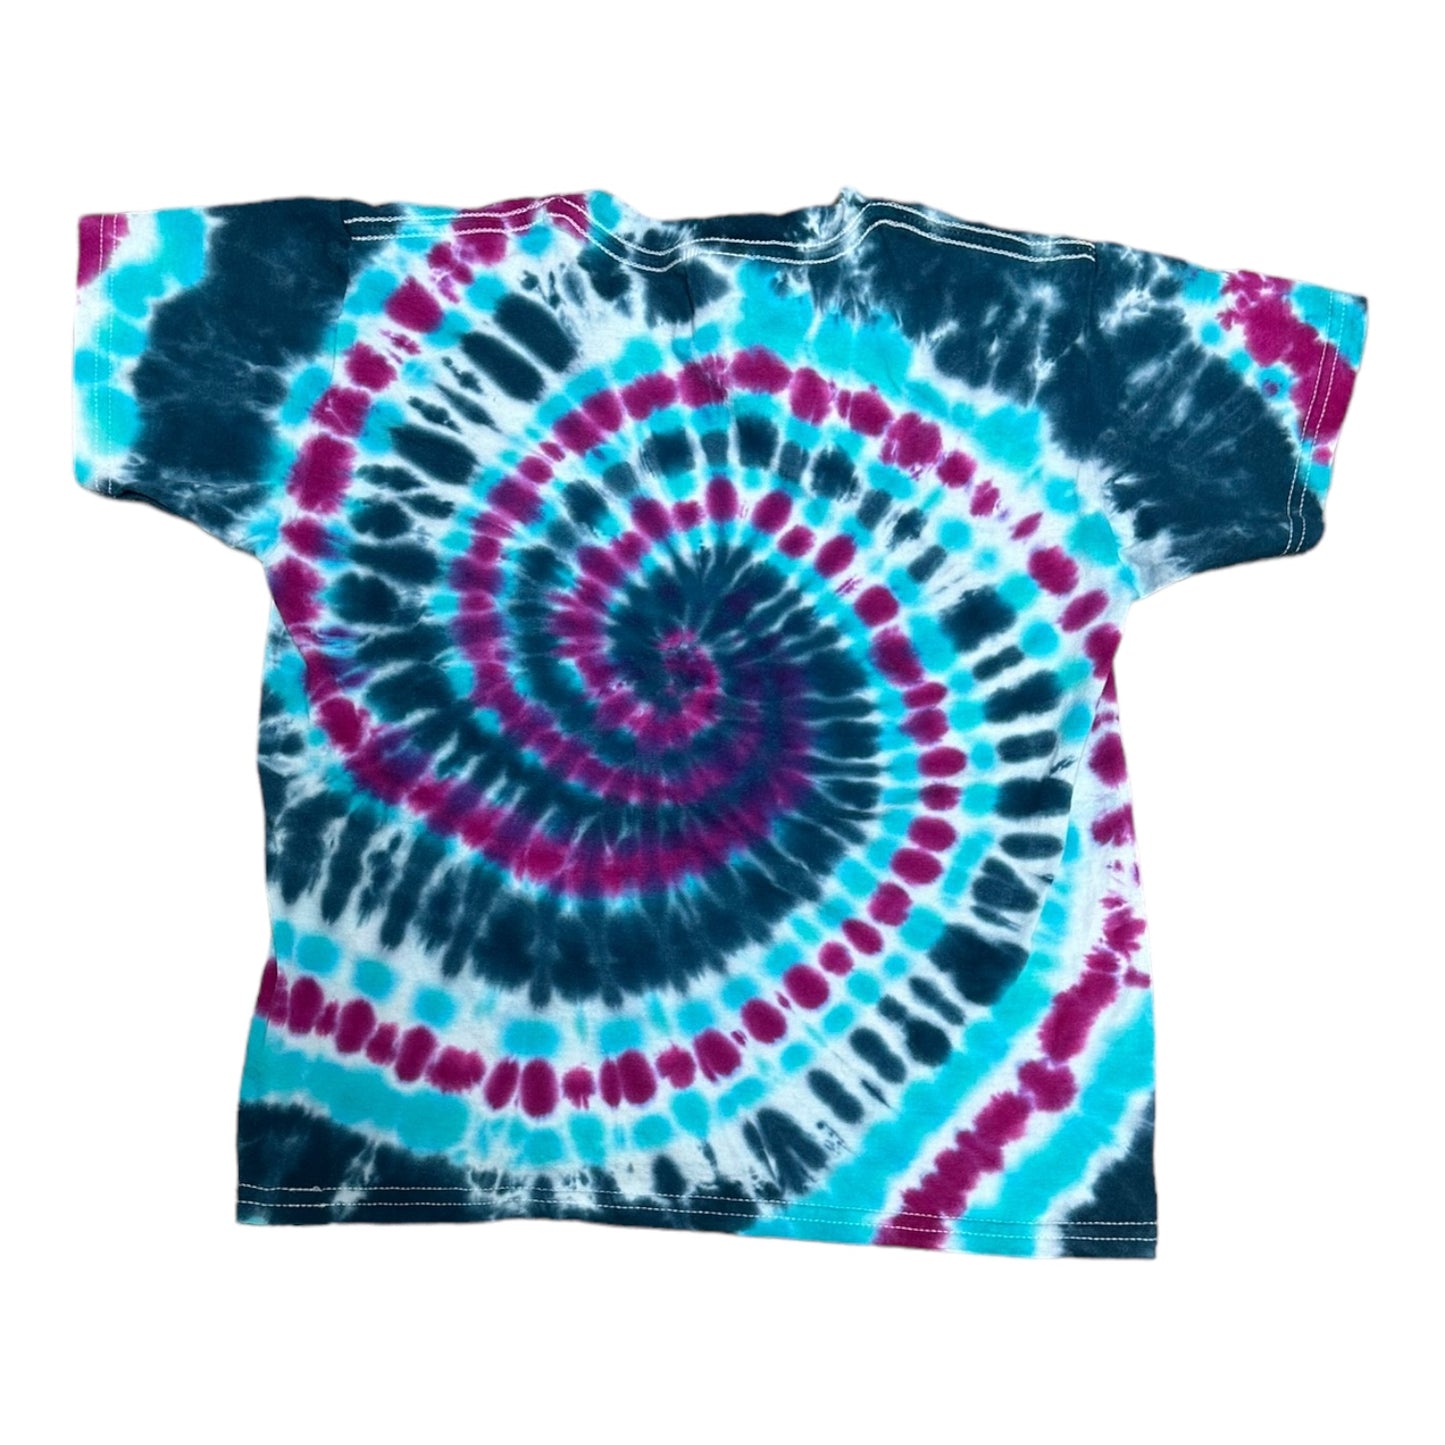 Youth Small Blue Black and Purple Spiral Tie Dye Shirt